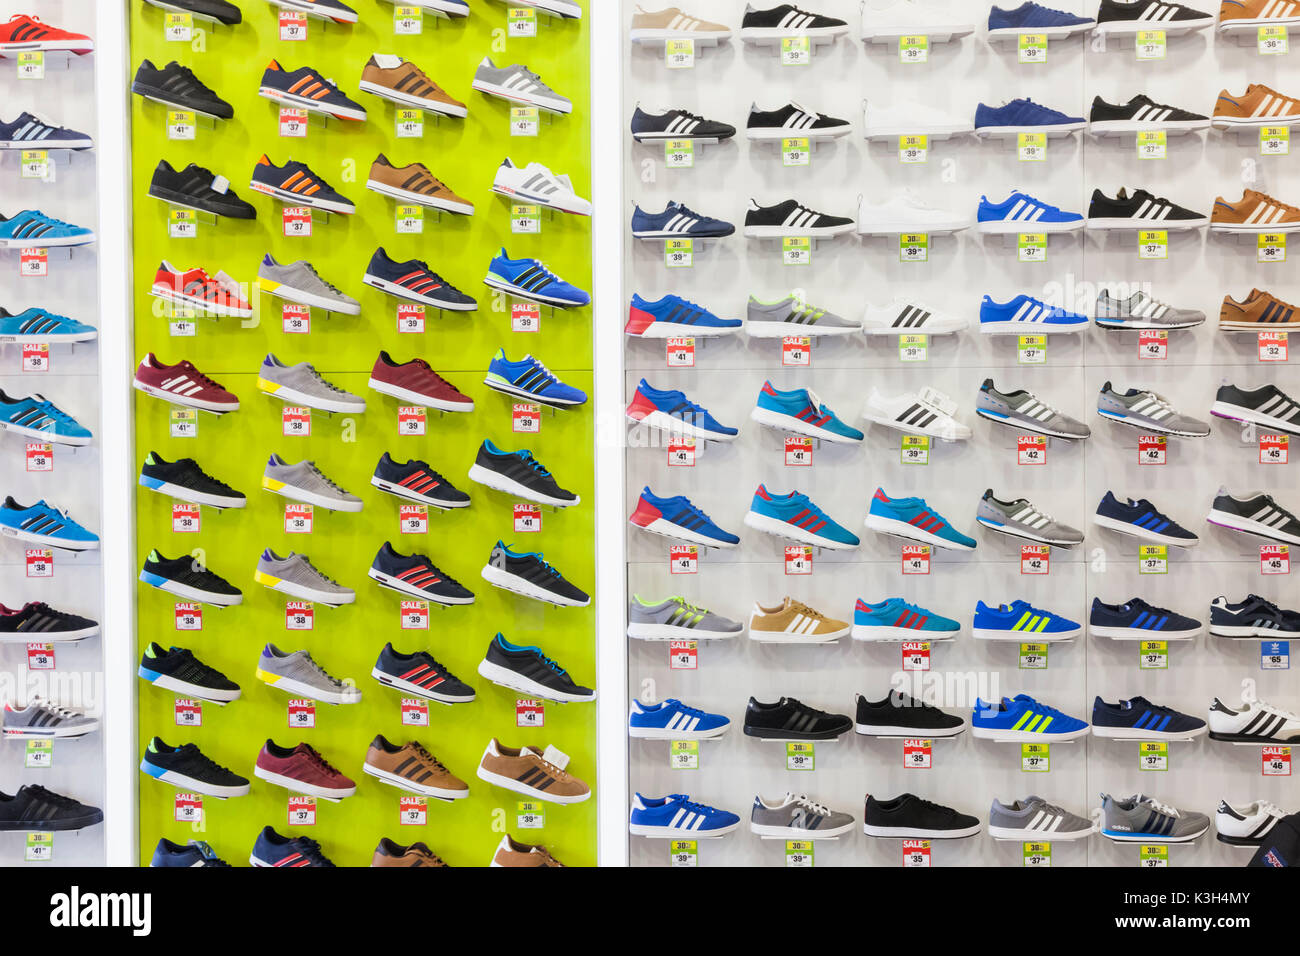 England, London, Piccadilly, Lilywhites Store, Display of Trainers Stock Photo